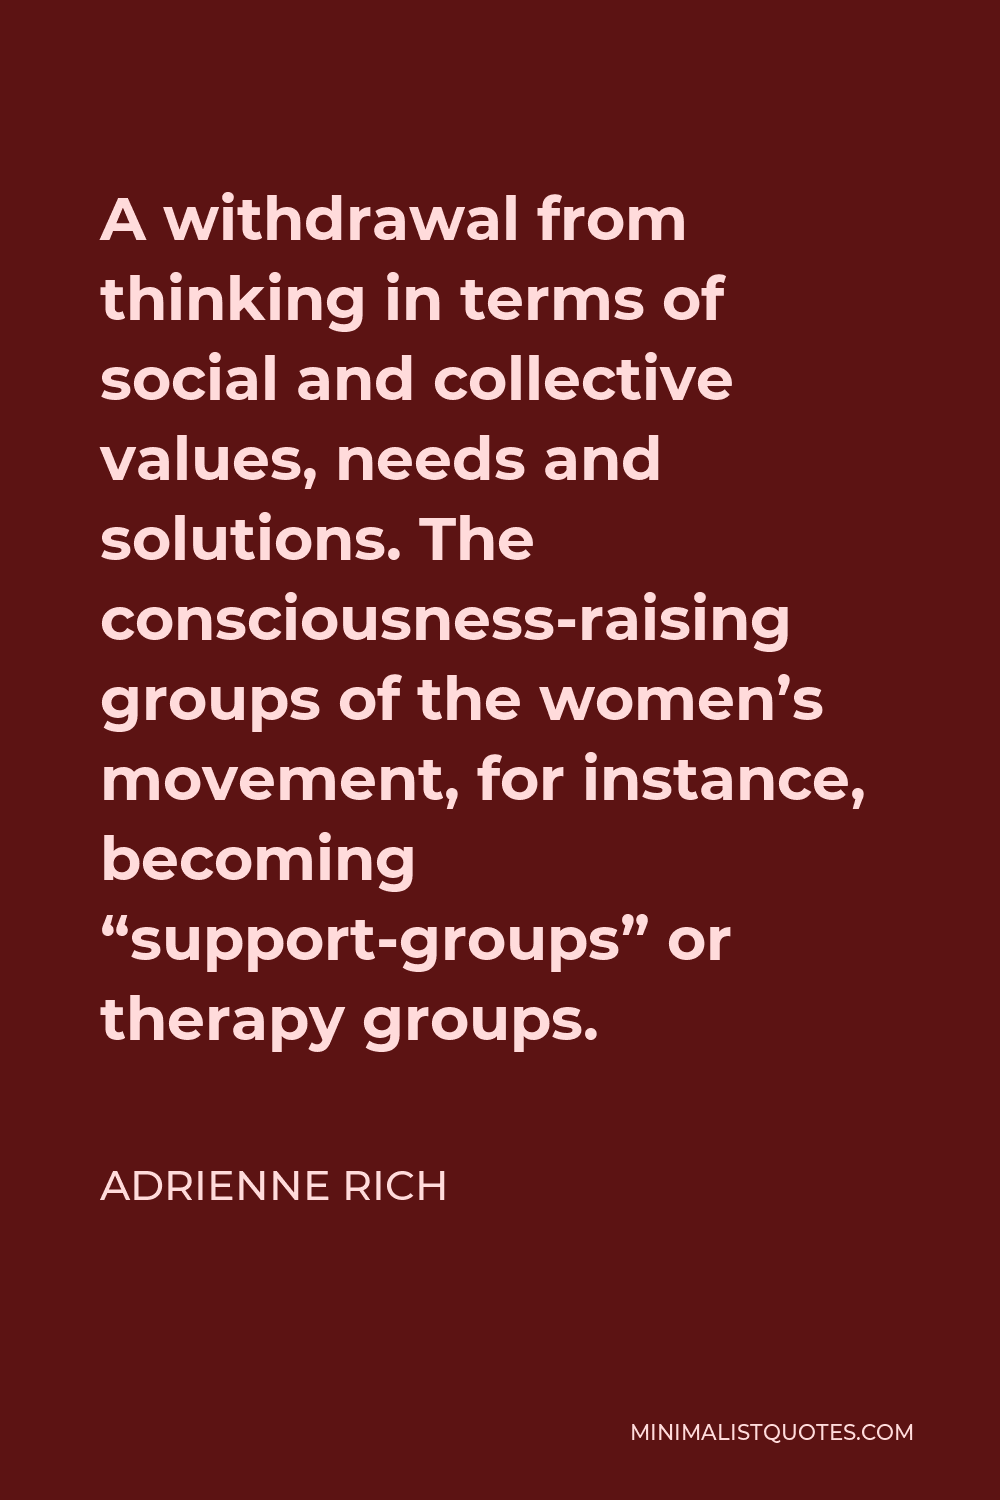 Adrienne Rich Quote - A withdrawal from thinking in terms of social and collective values, needs and solutions. The consciousness-raising groups of the women’s movement, for instance, becoming “support-groups” or therapy groups.